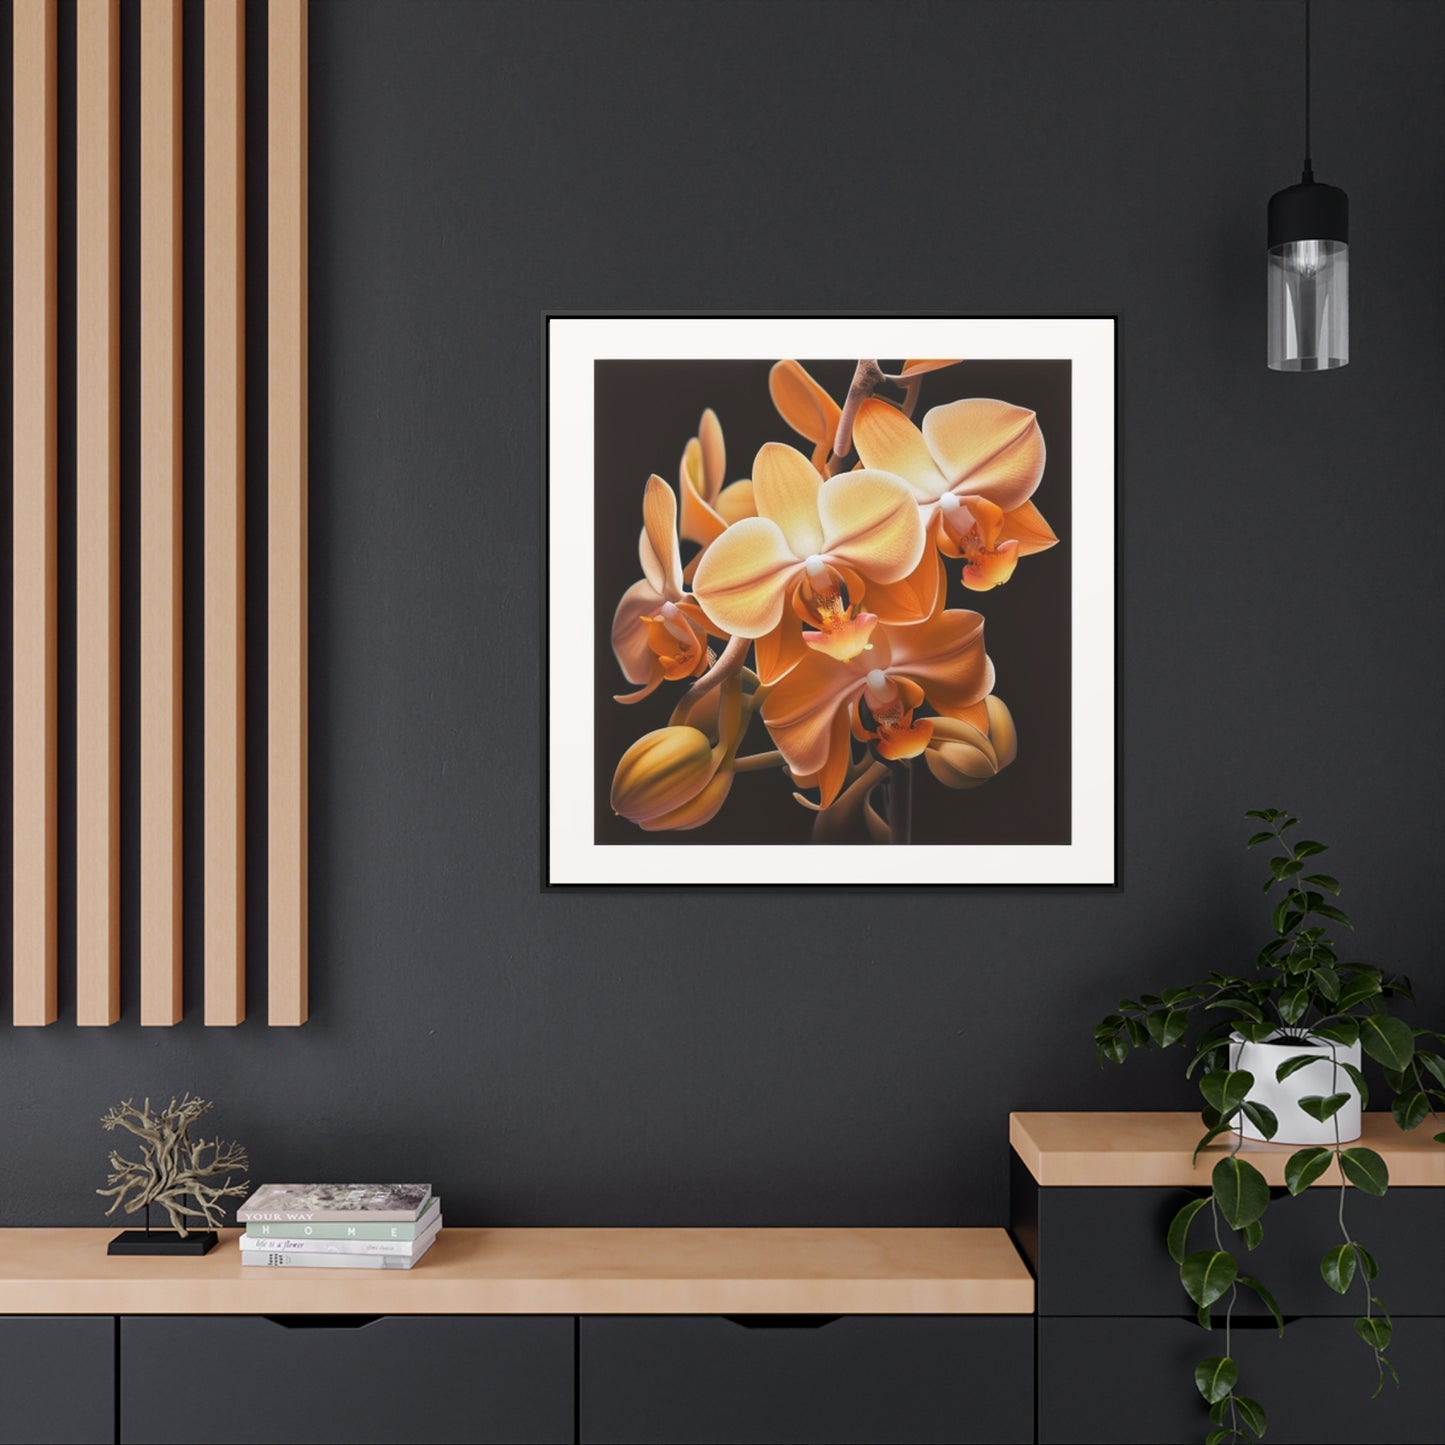 Gallery Canvas Wraps, Square Frame orchid pedals 1